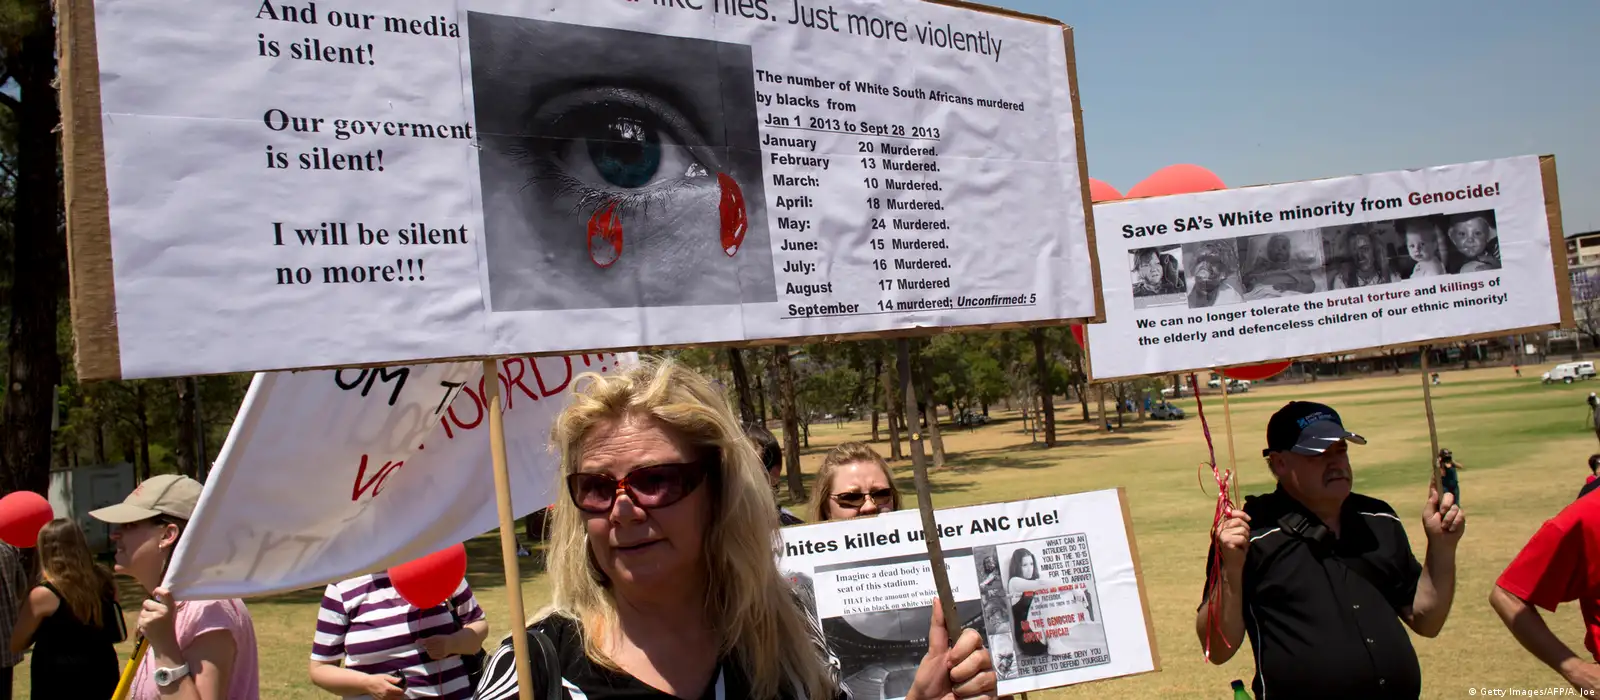 White supremacist flags in South Africa